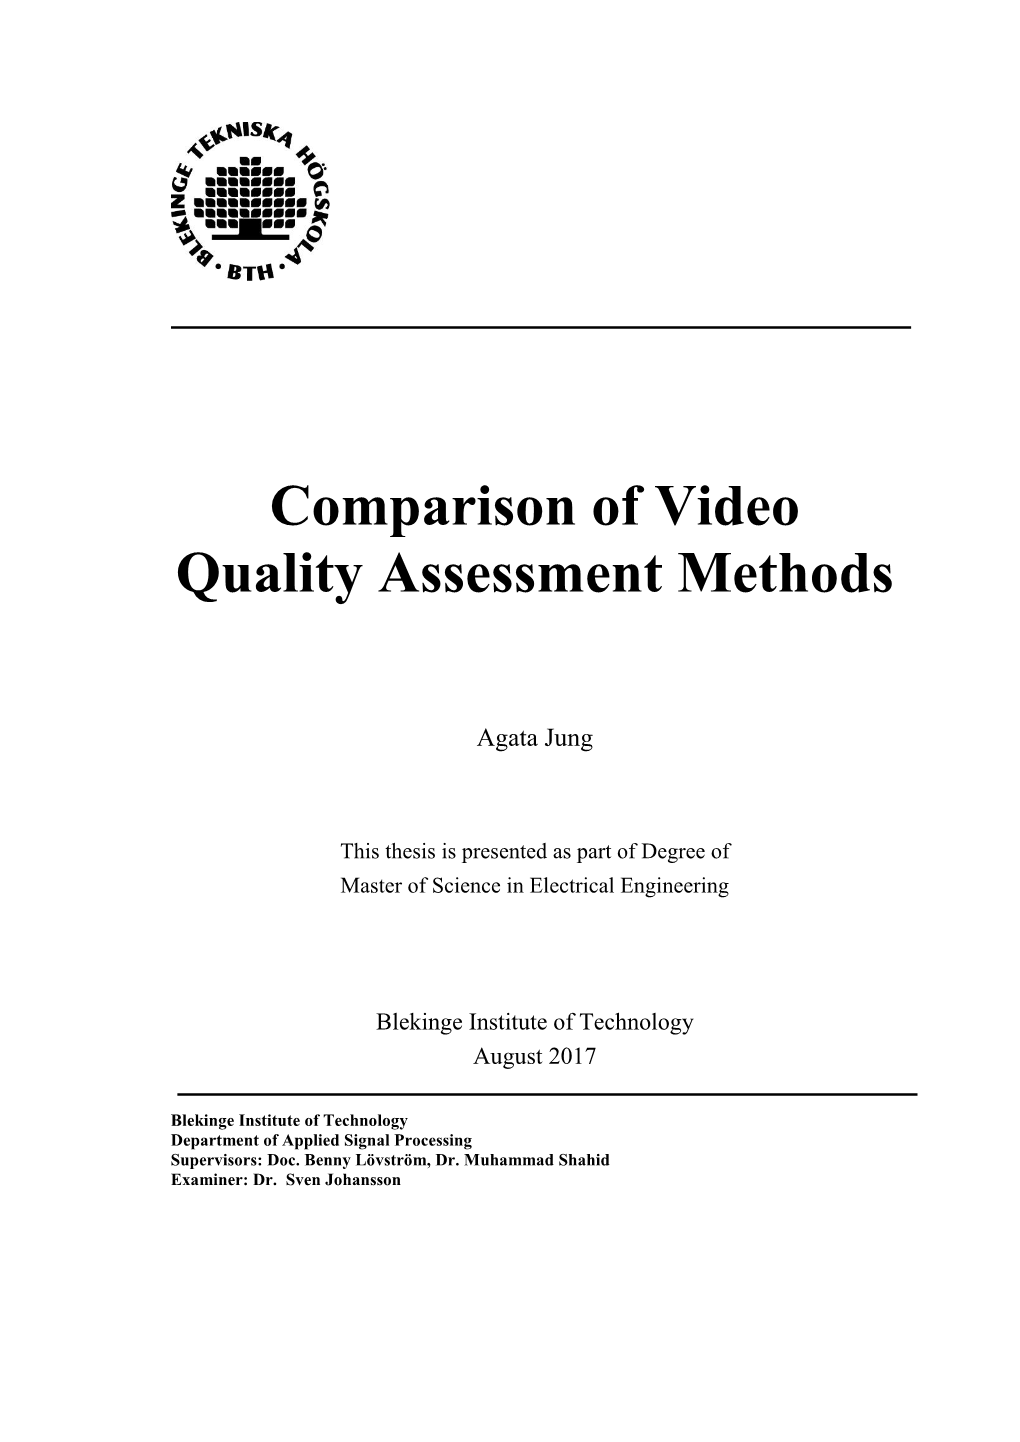 Comparison of Video Quality Assessment Methods